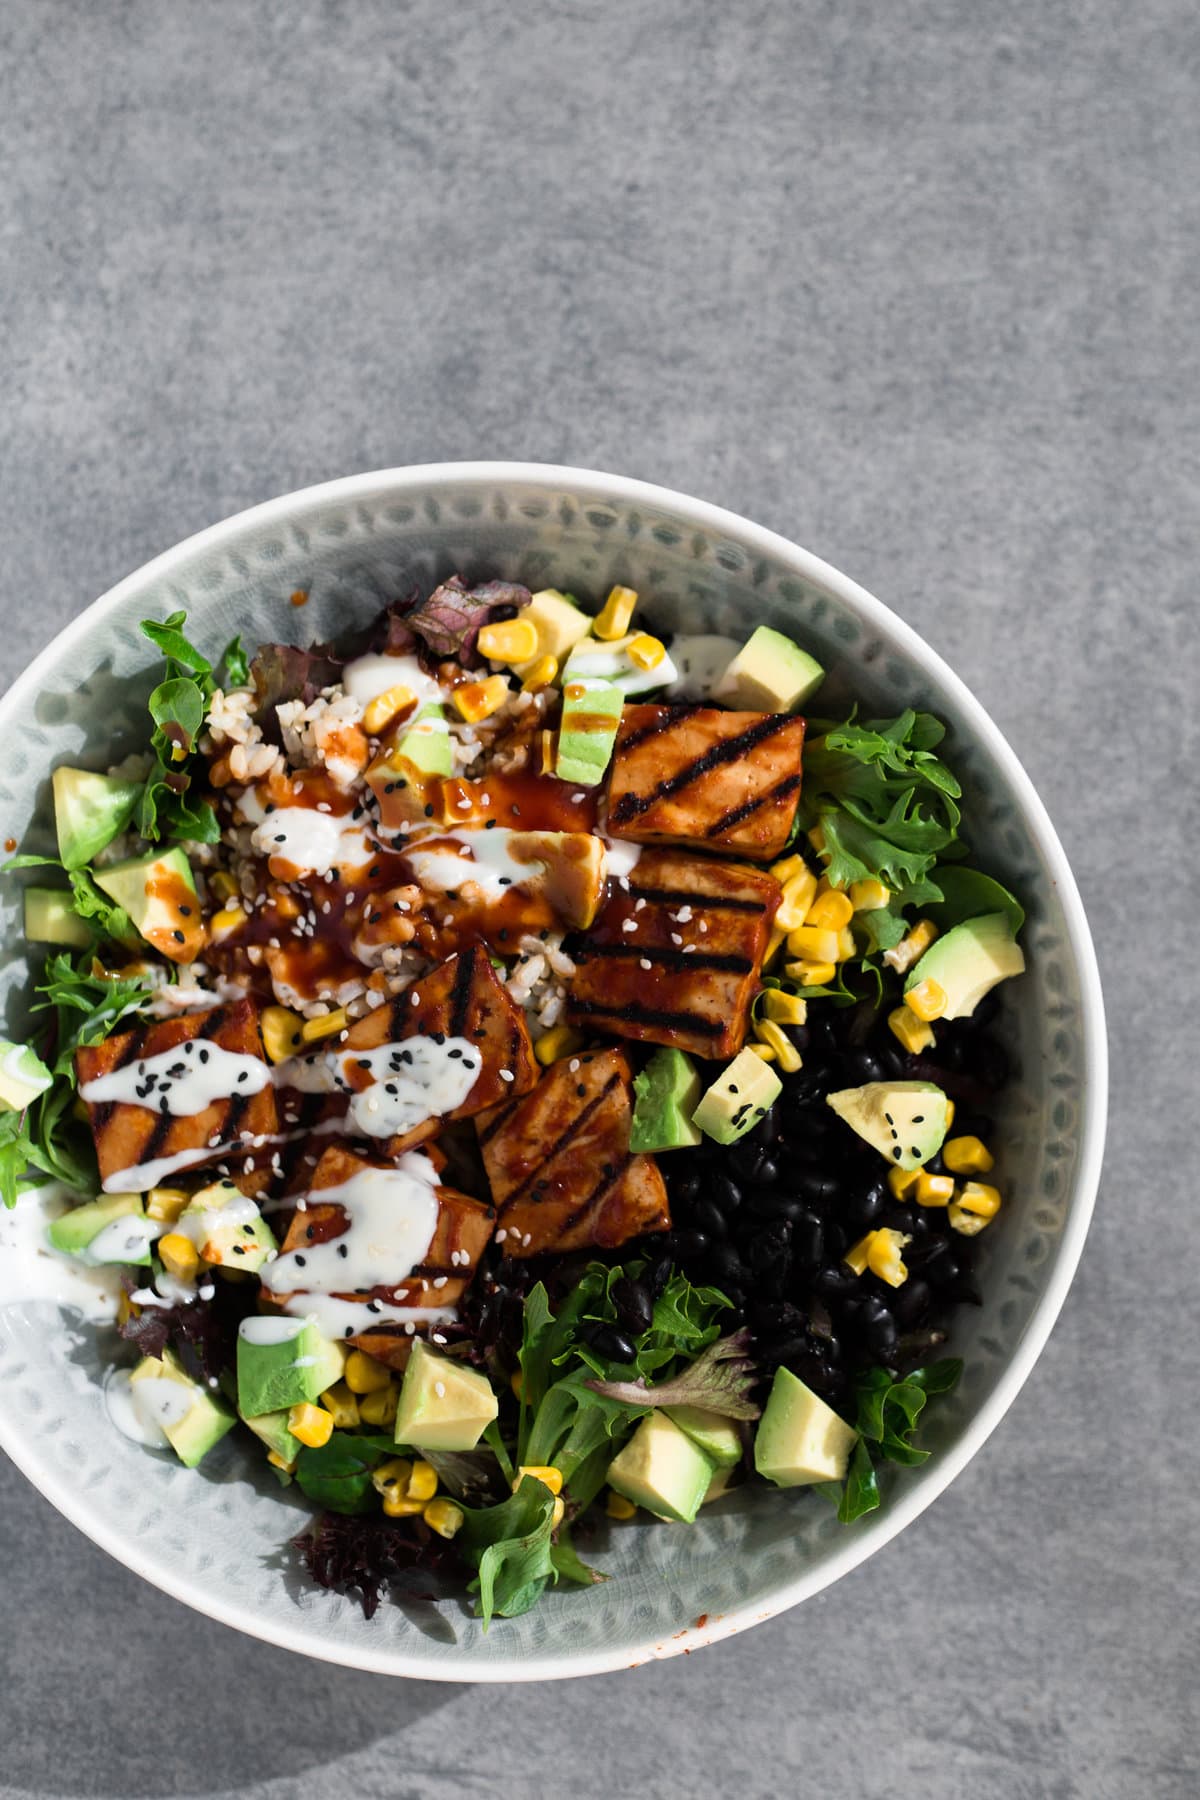 A delicious Vegan Barbecue Bowl loaded with Brown Rice, Avocado, Corn, Black Beans and Smokey Barbecue Tofu. Healthy, delicious, simple. #vegan #bbq #tofu #barbecue #mexican #burritobowl #salad #delicious #healthy #yum